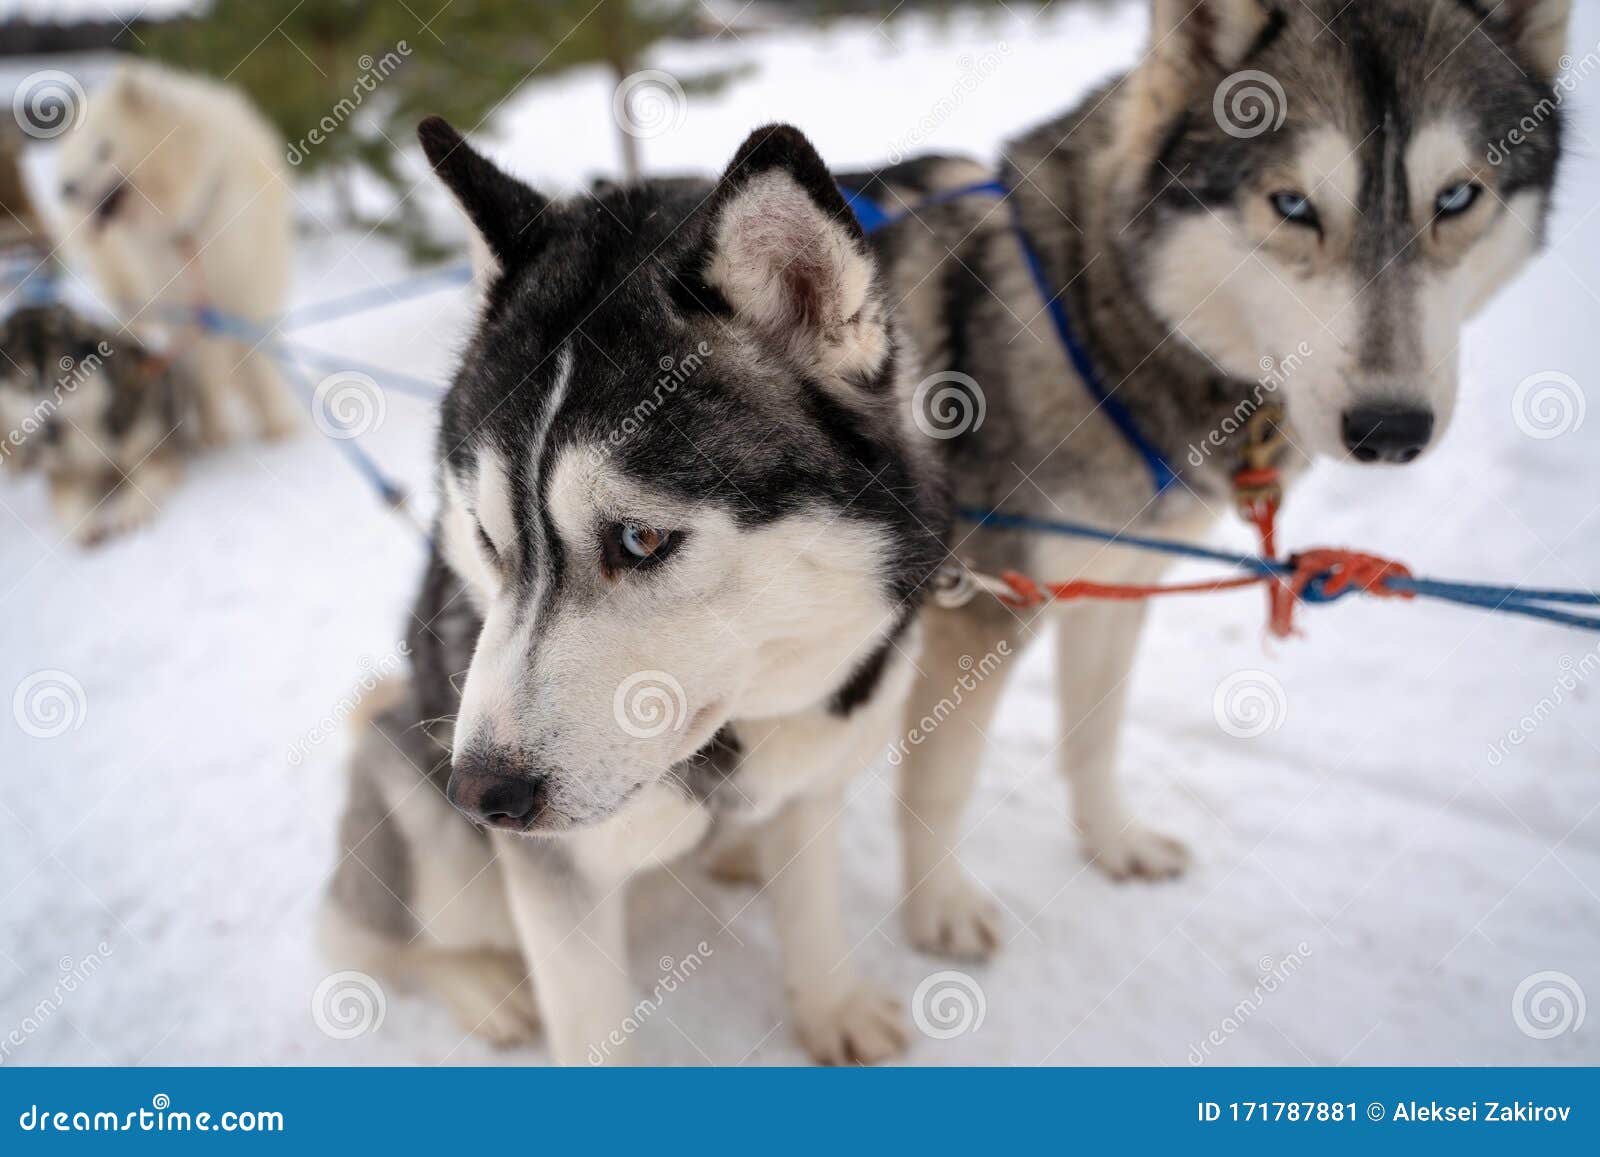 Two Siberian Husky Dogs Looks Forward Sitting On The Snowy Shore Frozen River Husky Dogs Black Brown And White Coat Color Cute Stock Image Image Of Nose Active 171787881